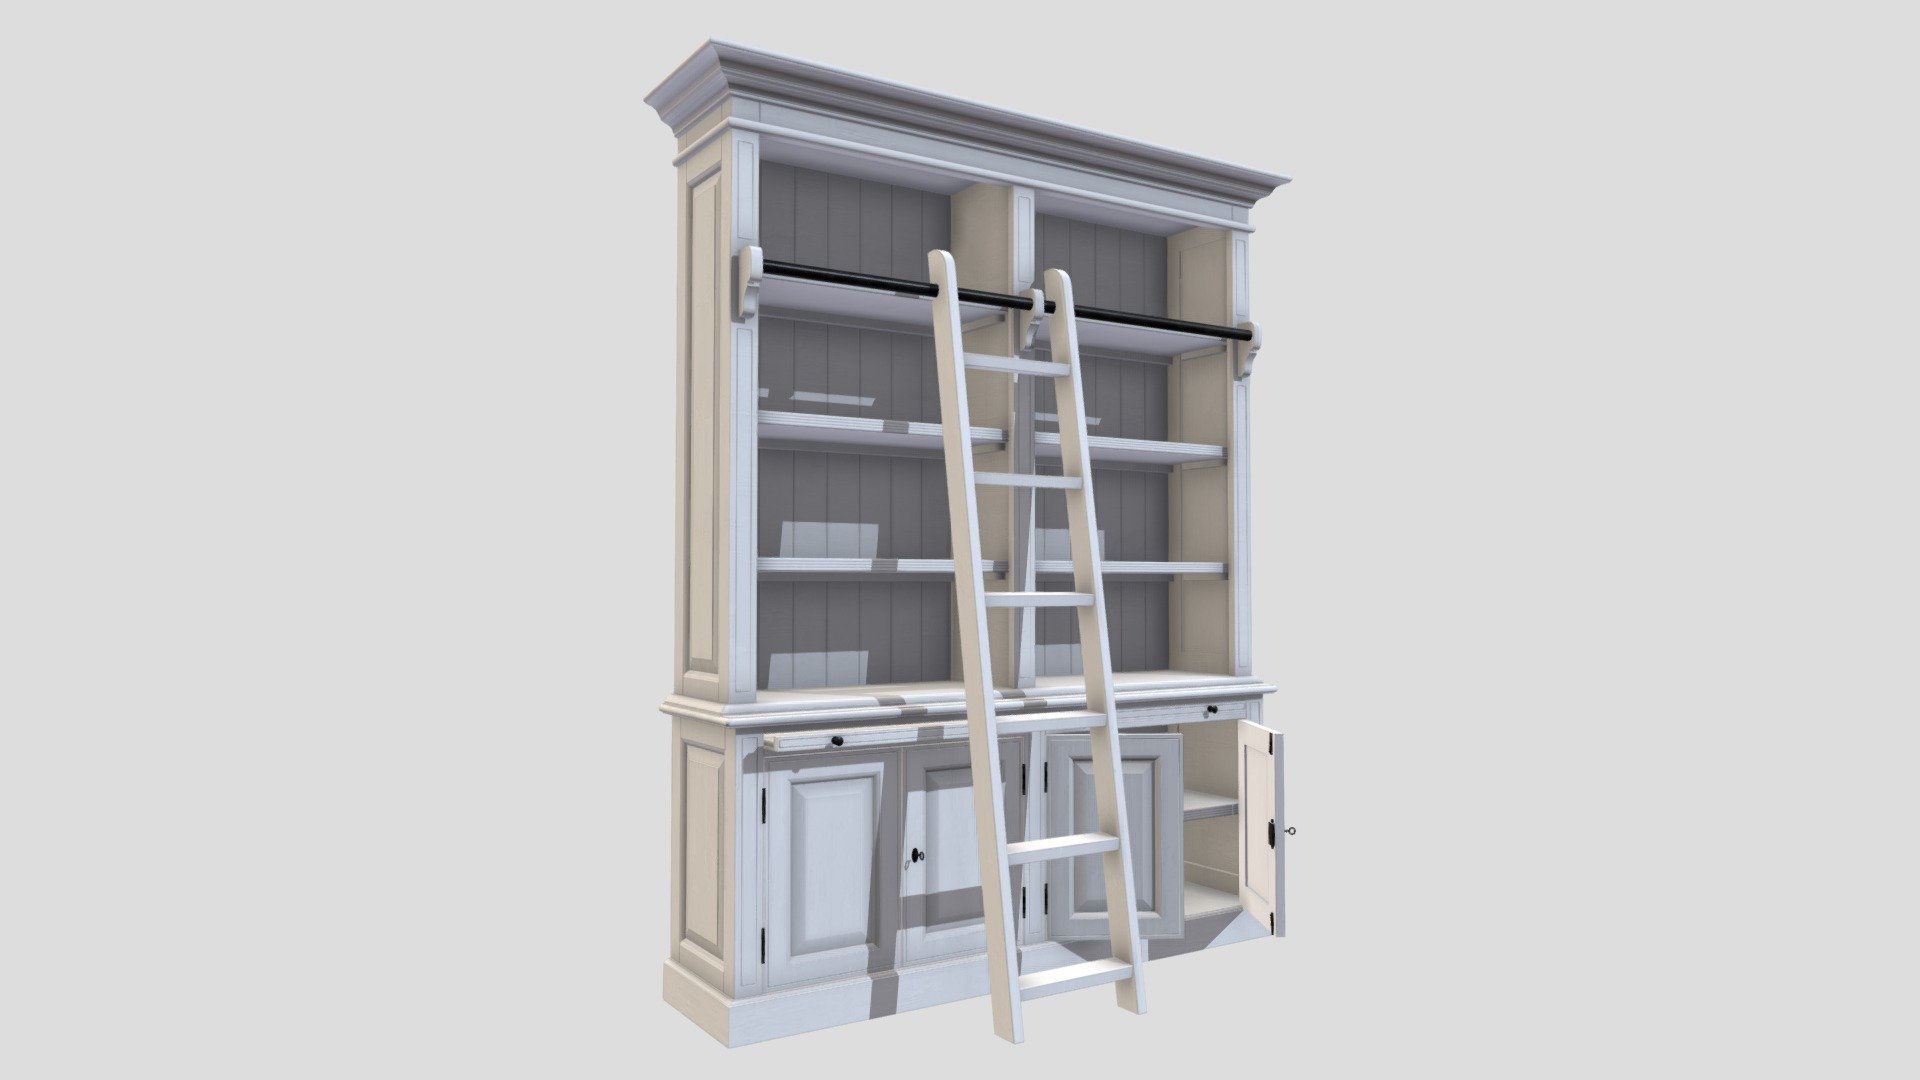 Replica of a Hampton-style white bookshelf with a ladder for ease of access &amp; a slightly worn finish

Made using a tape measure, Blender 3.0.1 &amp; Substance Painter 2020 6.2.2 - Ornate Bookshelf with ladder - 3D model by HazelnutAUS 3d model